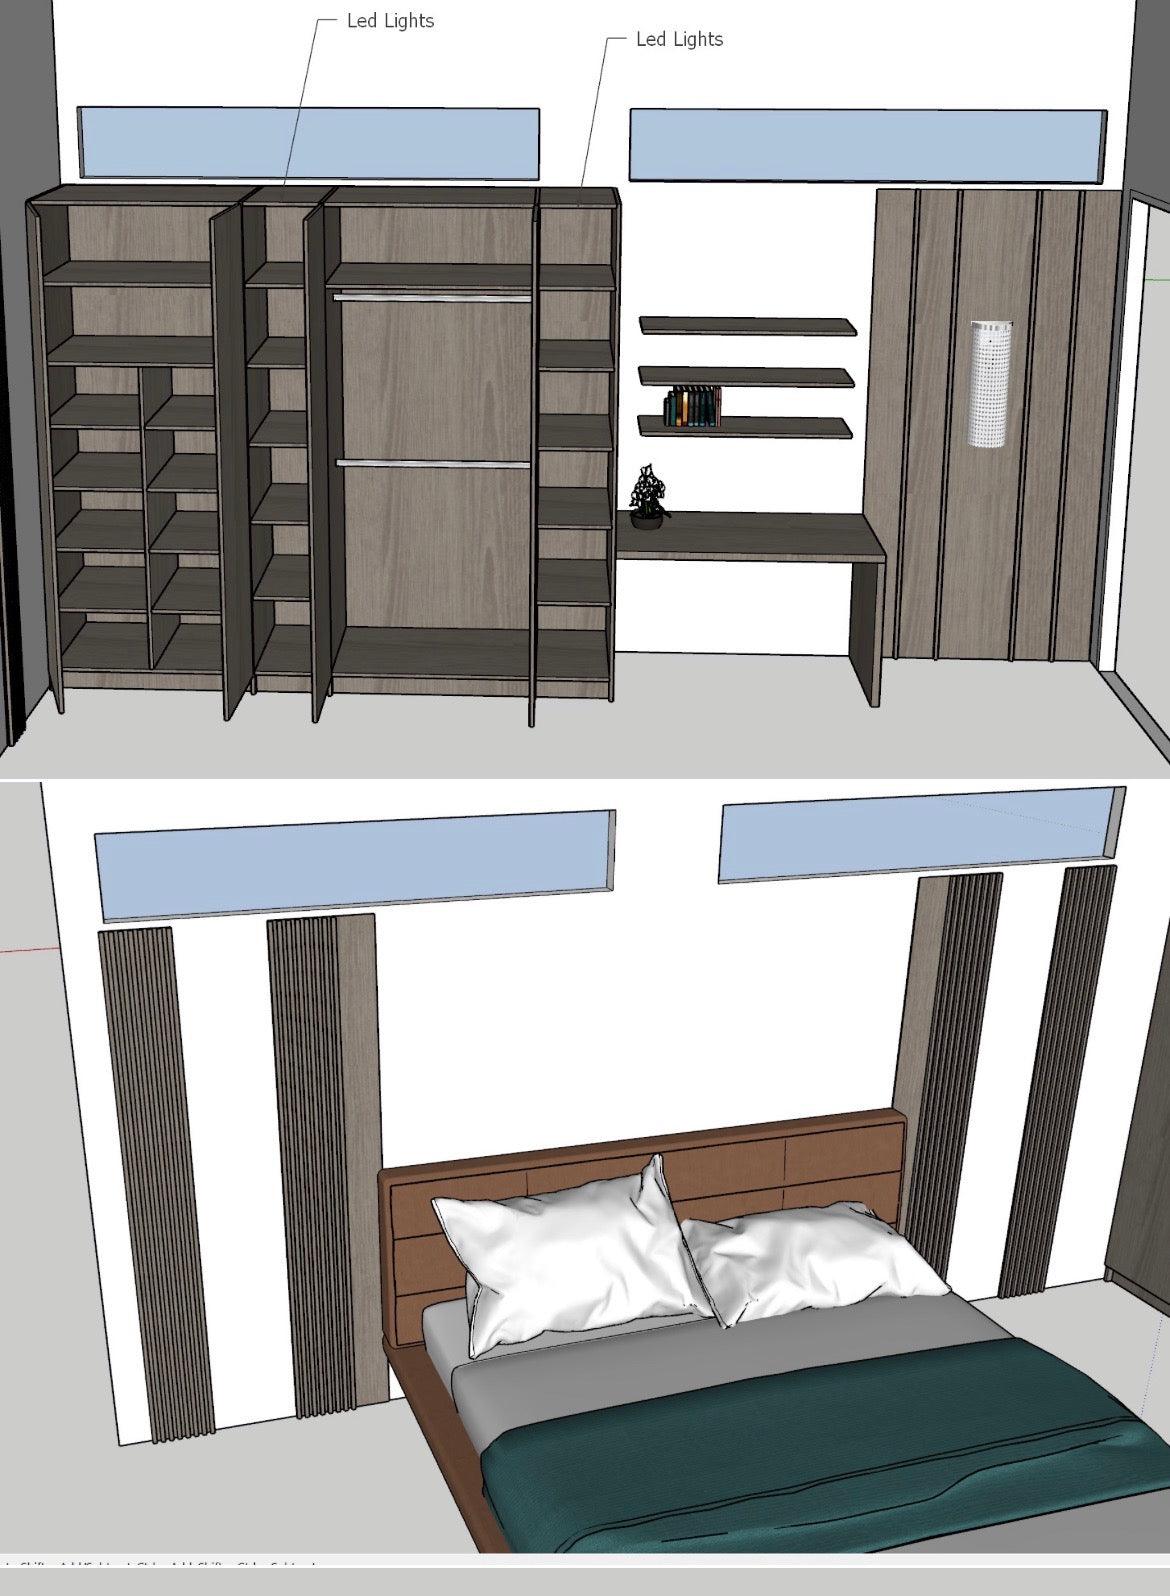 Bedroom project - Euro Living Furniture